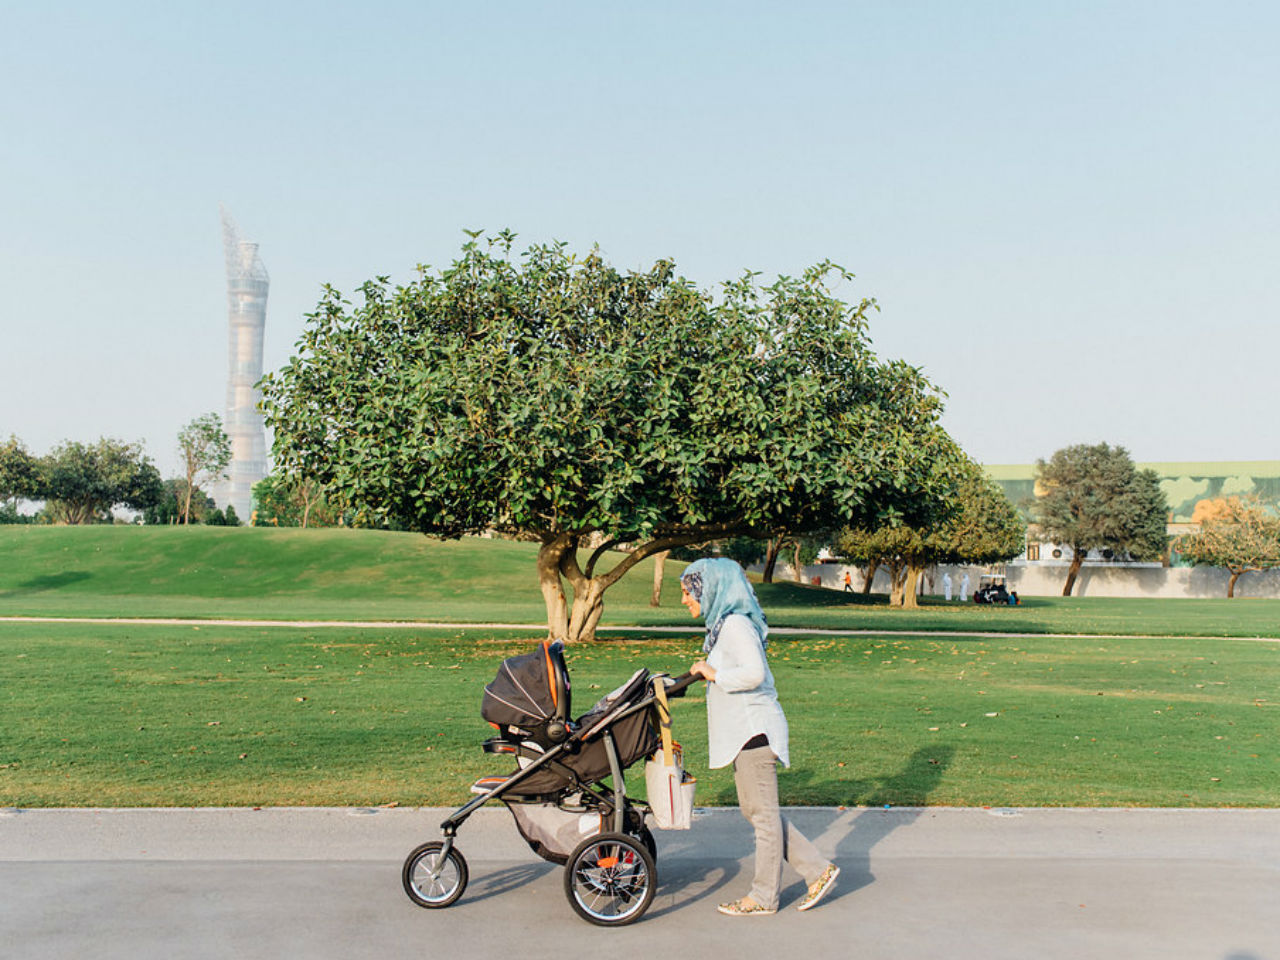 a mother walks her baby in a stroller at the park